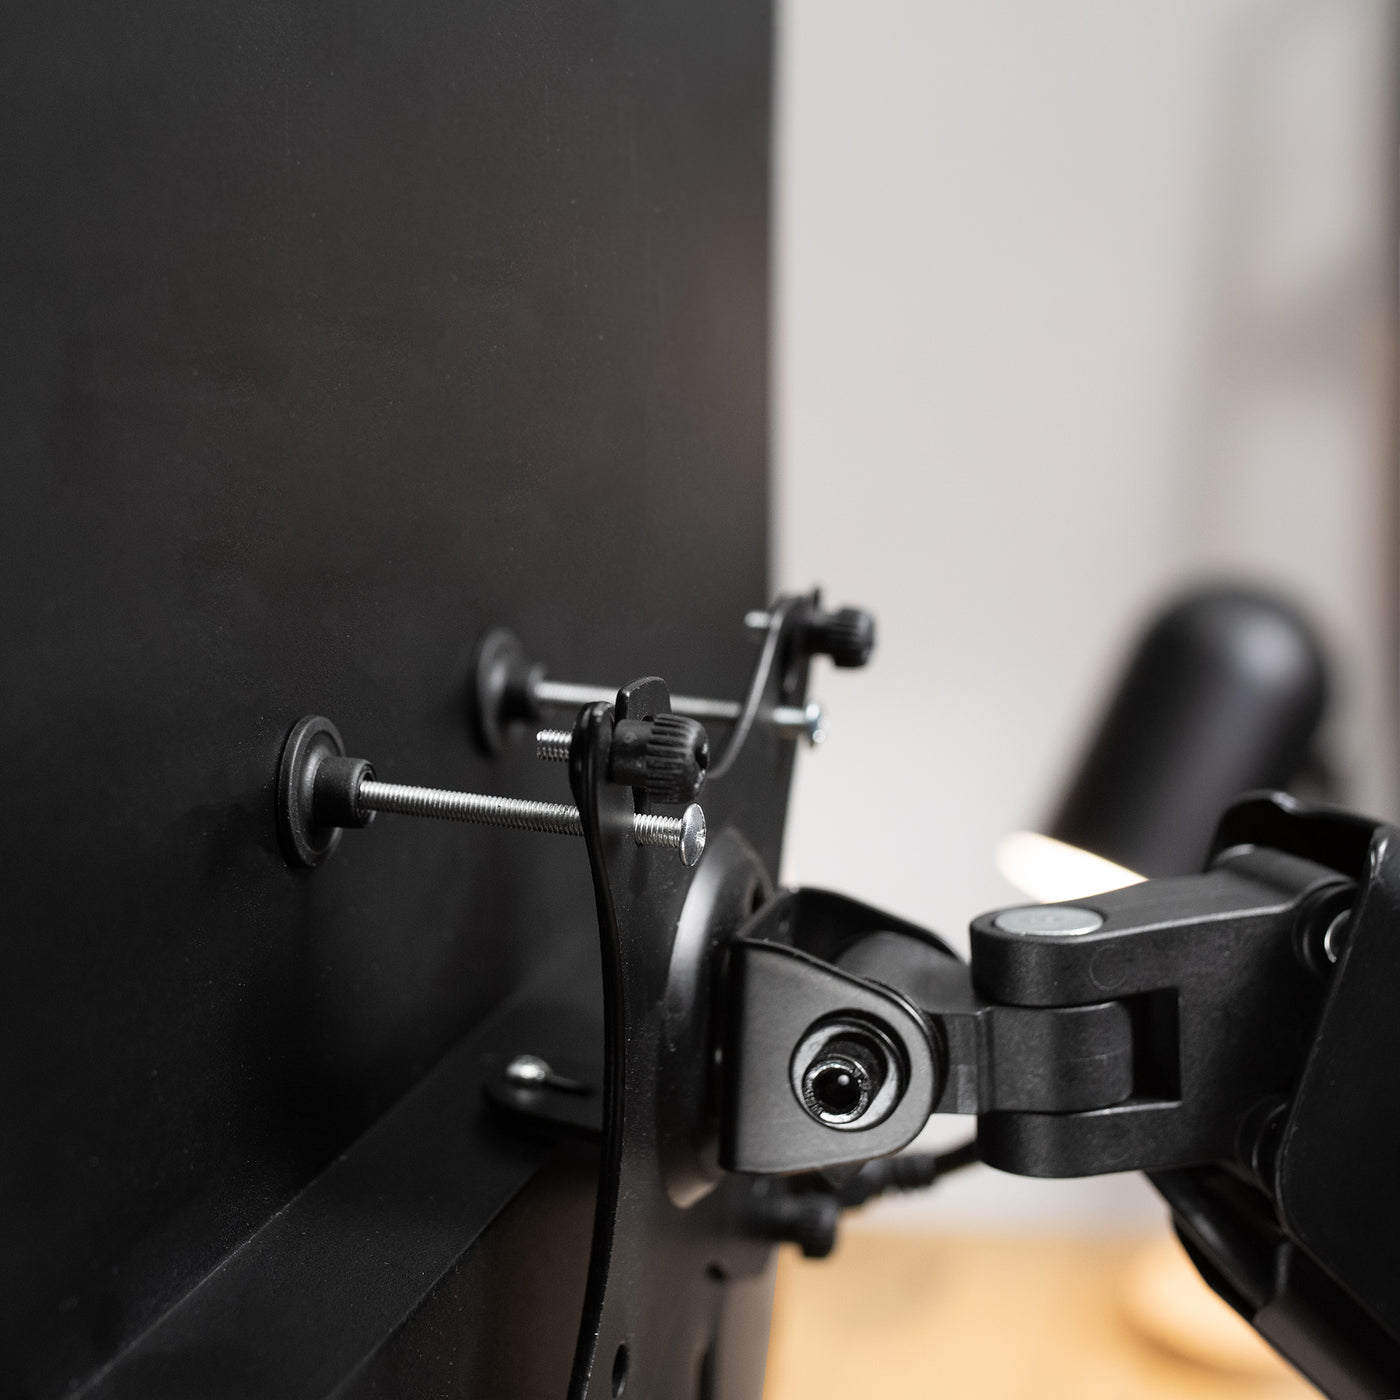 Quickly attach the VESA adapter mounting bracket from VIVO.